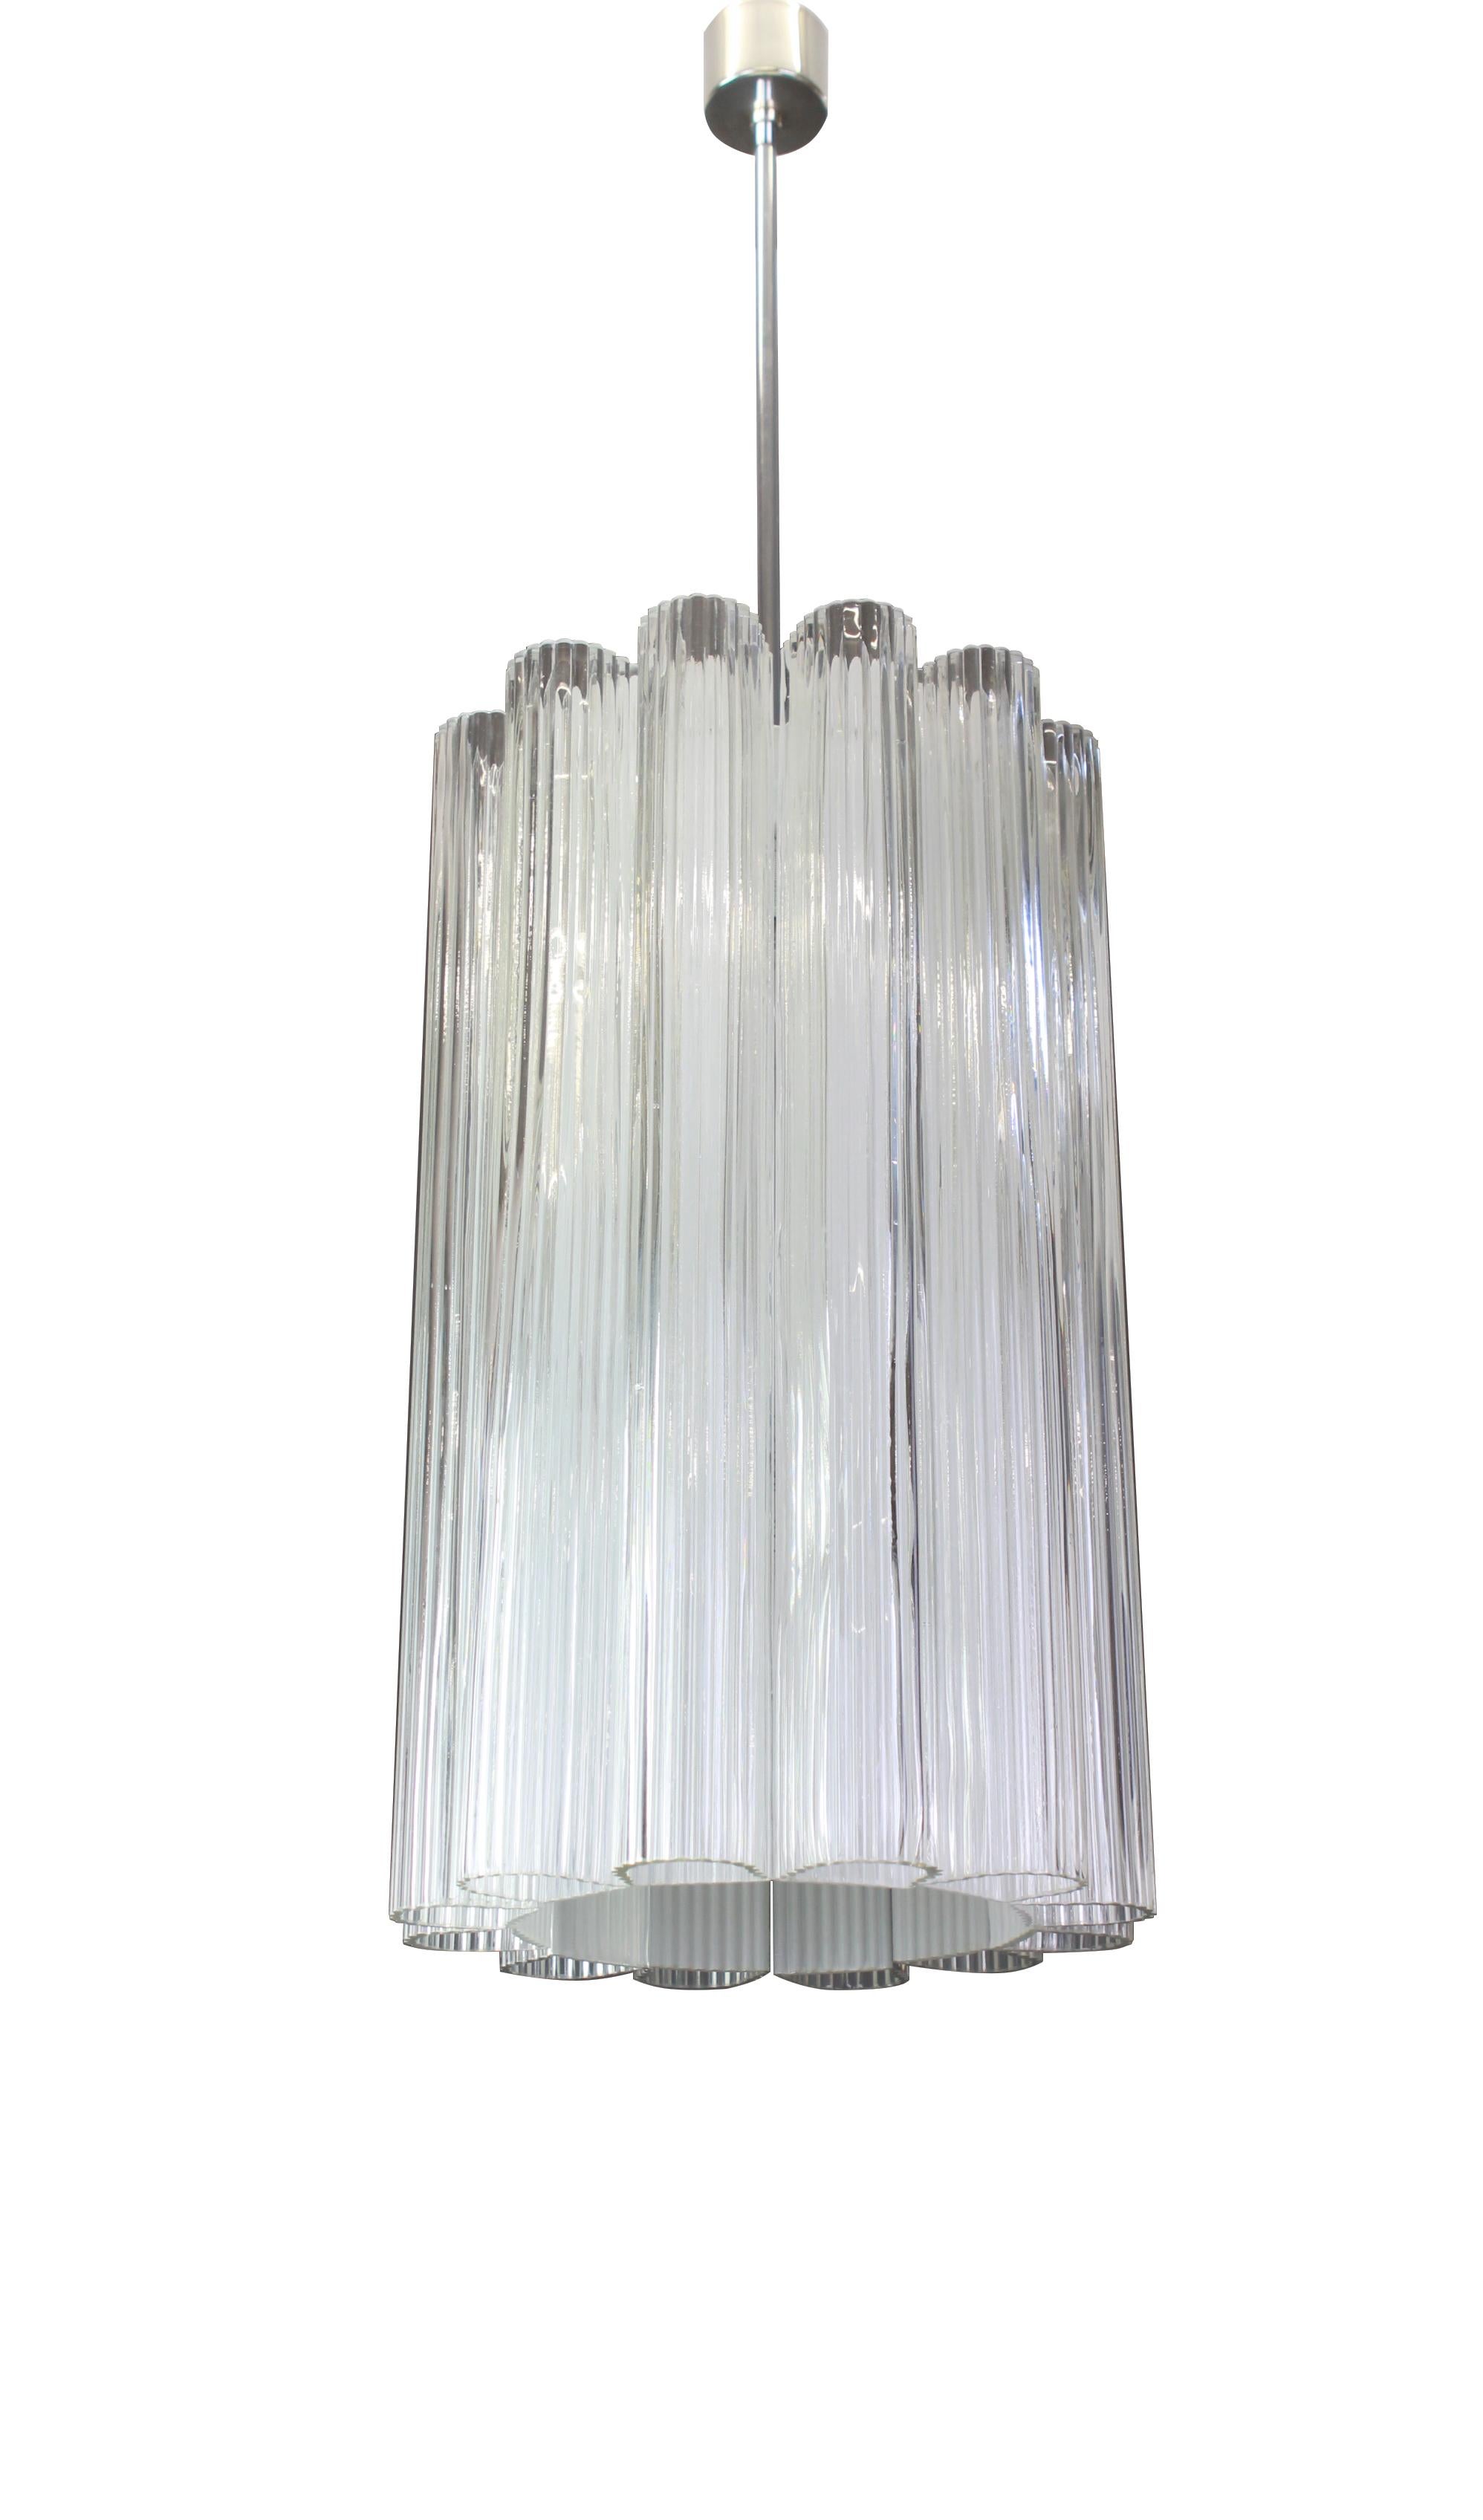 Mid-Century Modern 1 of 2 Cylindrical Pendant Fixture with Crystal Glass by Doria, Germany, 1960s